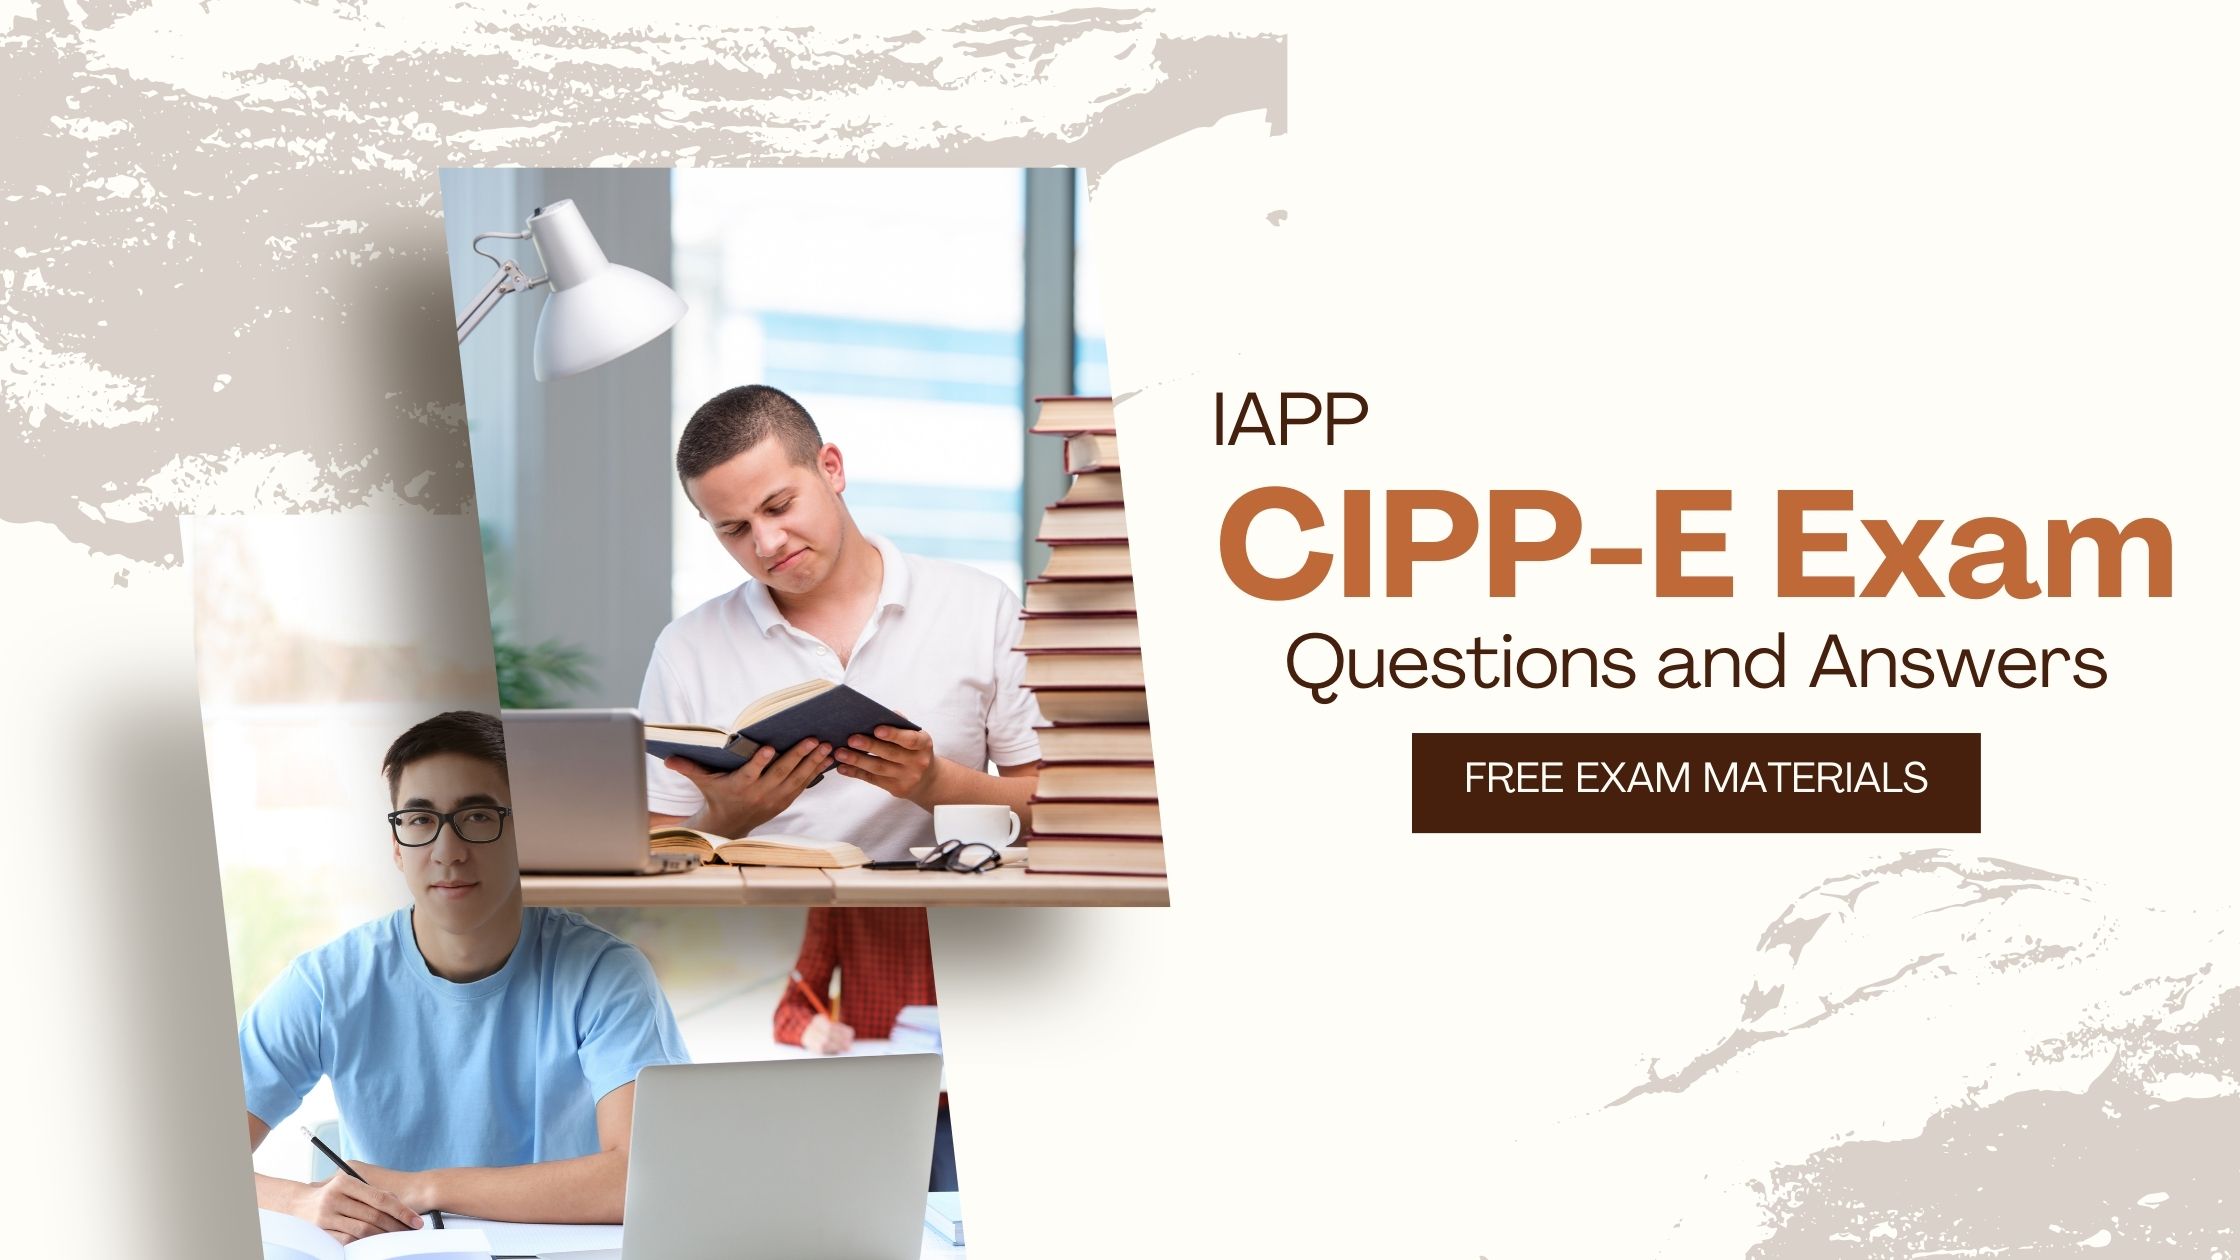 CIPP-E Exam Questions and Answers